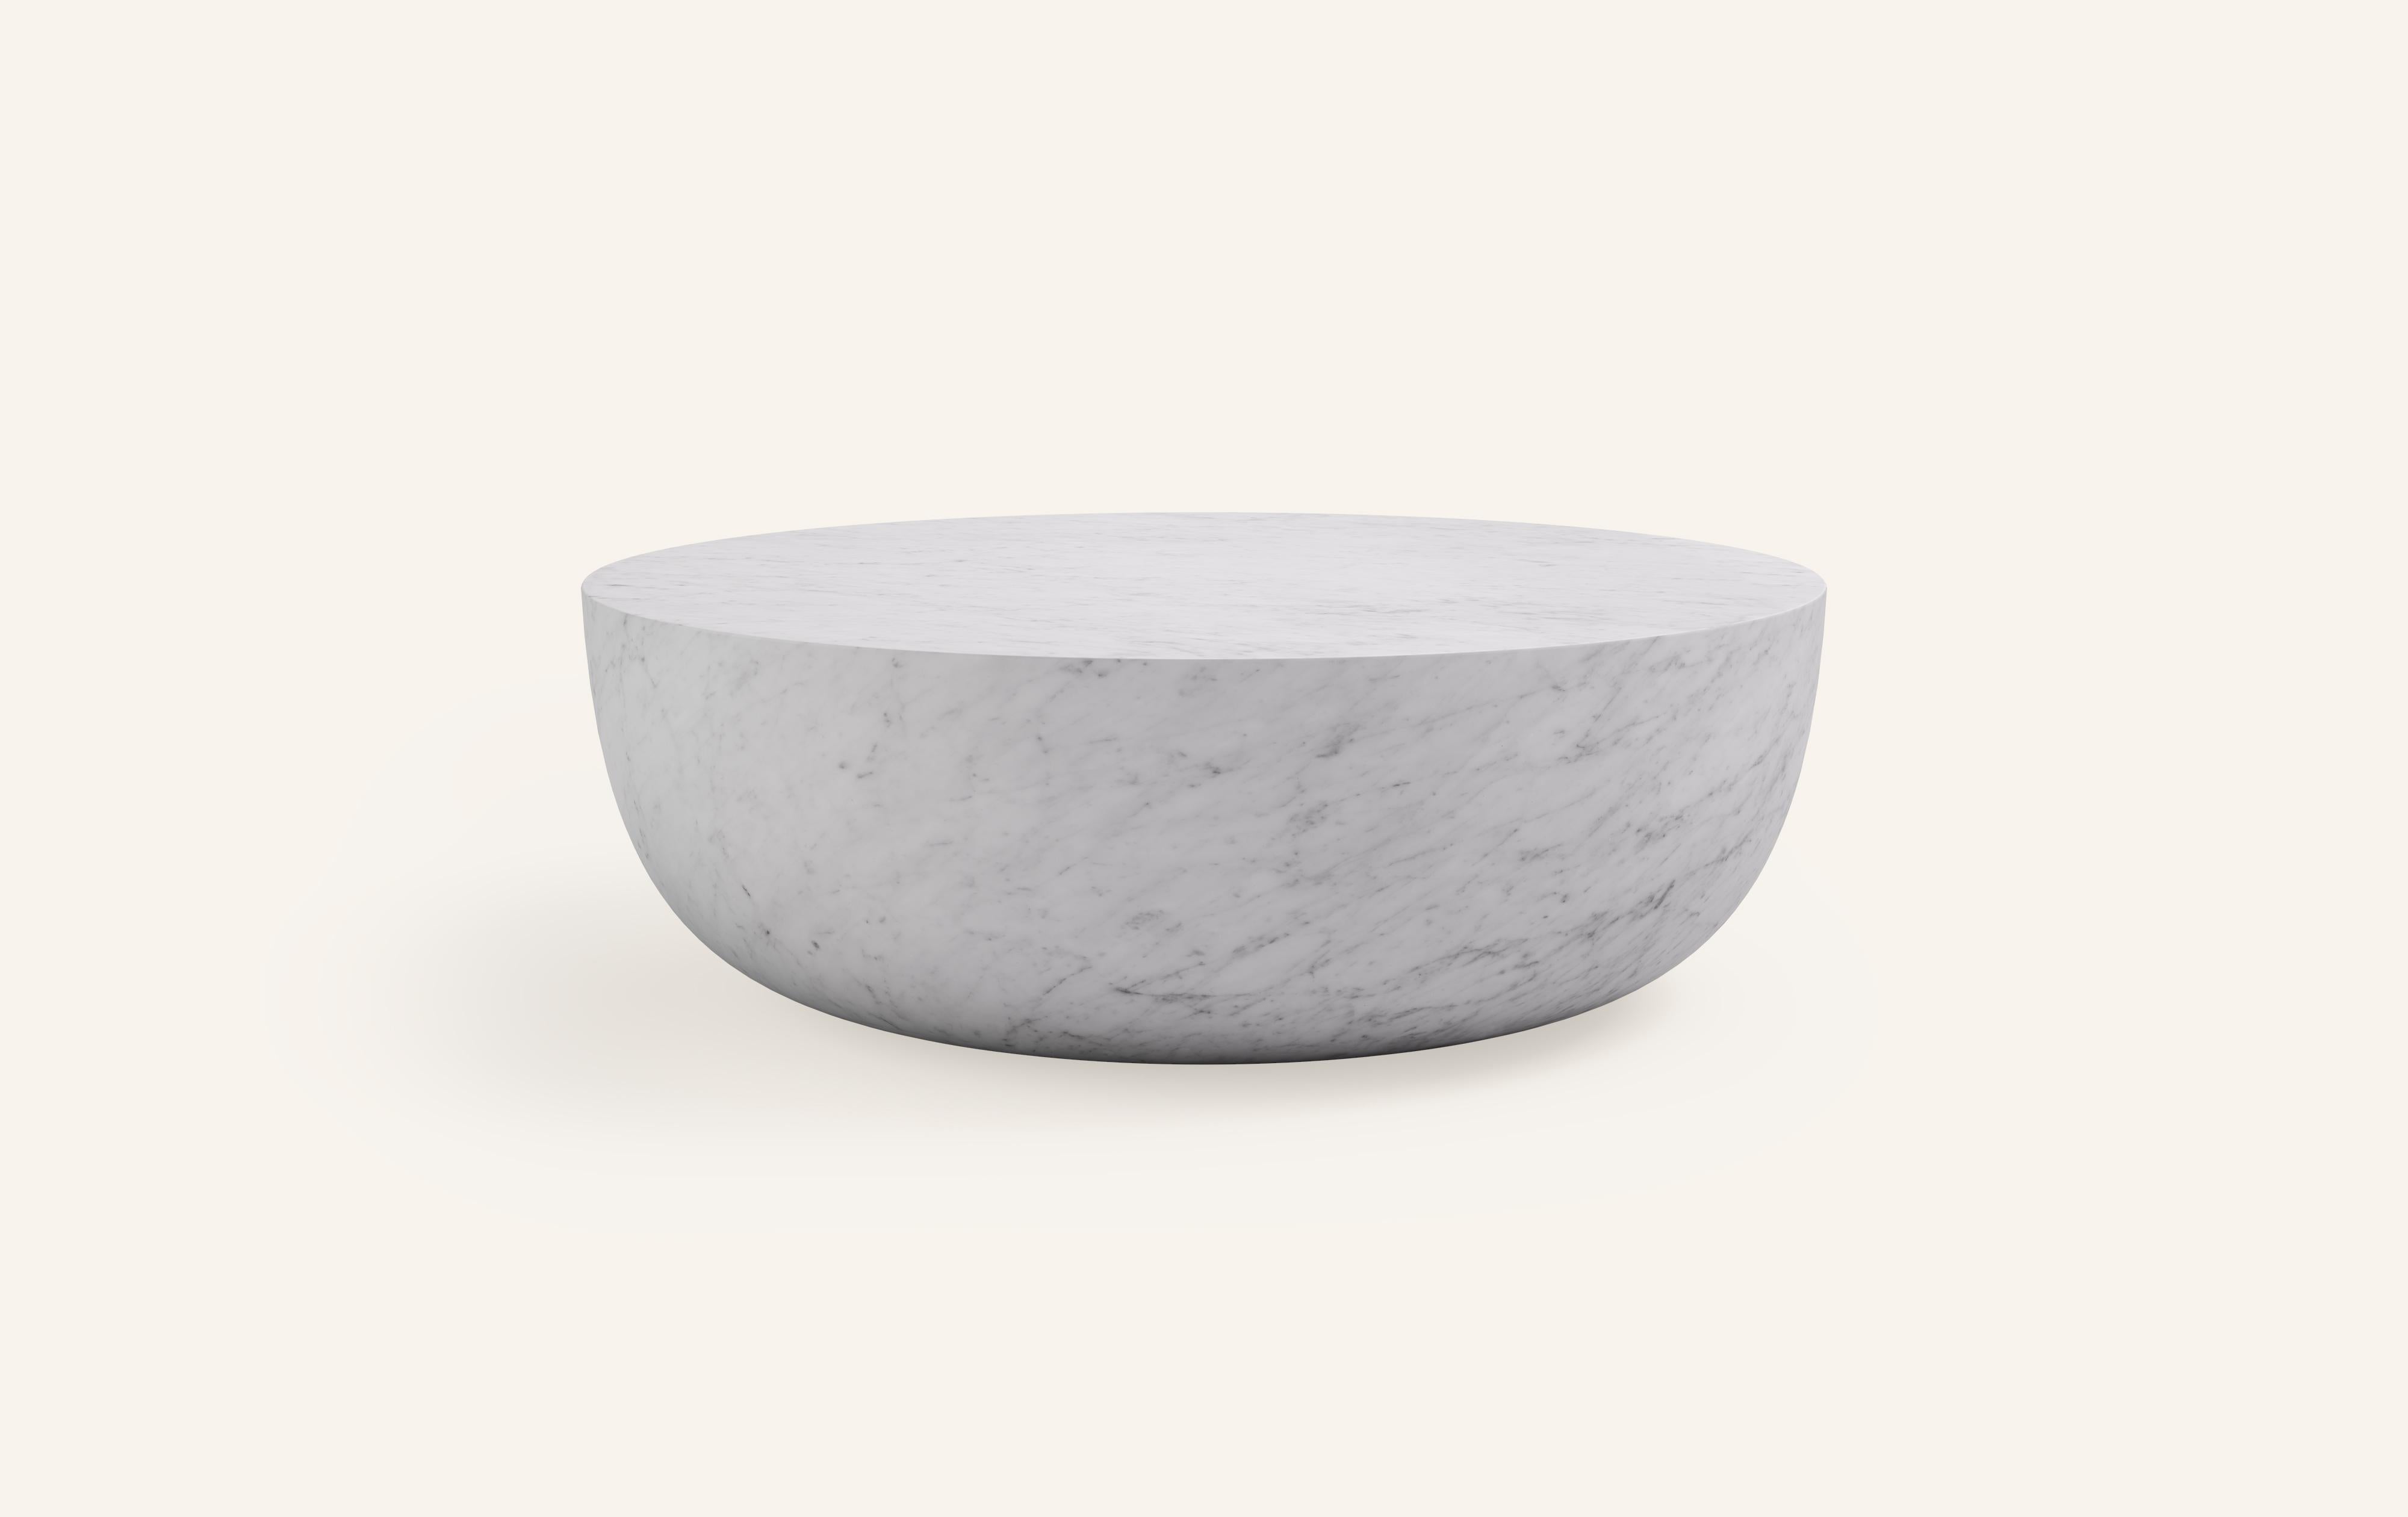 A SLICE OF A ’SPHERE’ OR 'SFERA' IN ITALIAN BALANCES A FLAT SURFACE ATOP AND ROBUST MONOLITH FORM. WITH A BASE SOFTENED BY A CURVED PROFILE, SFERA IS SOFT AND EARTHY IN ITS AVAILABLE STONE SELECTIONS.

DIMENSIONS: 
54”L x 54”W x 16”H: 
- SOLID